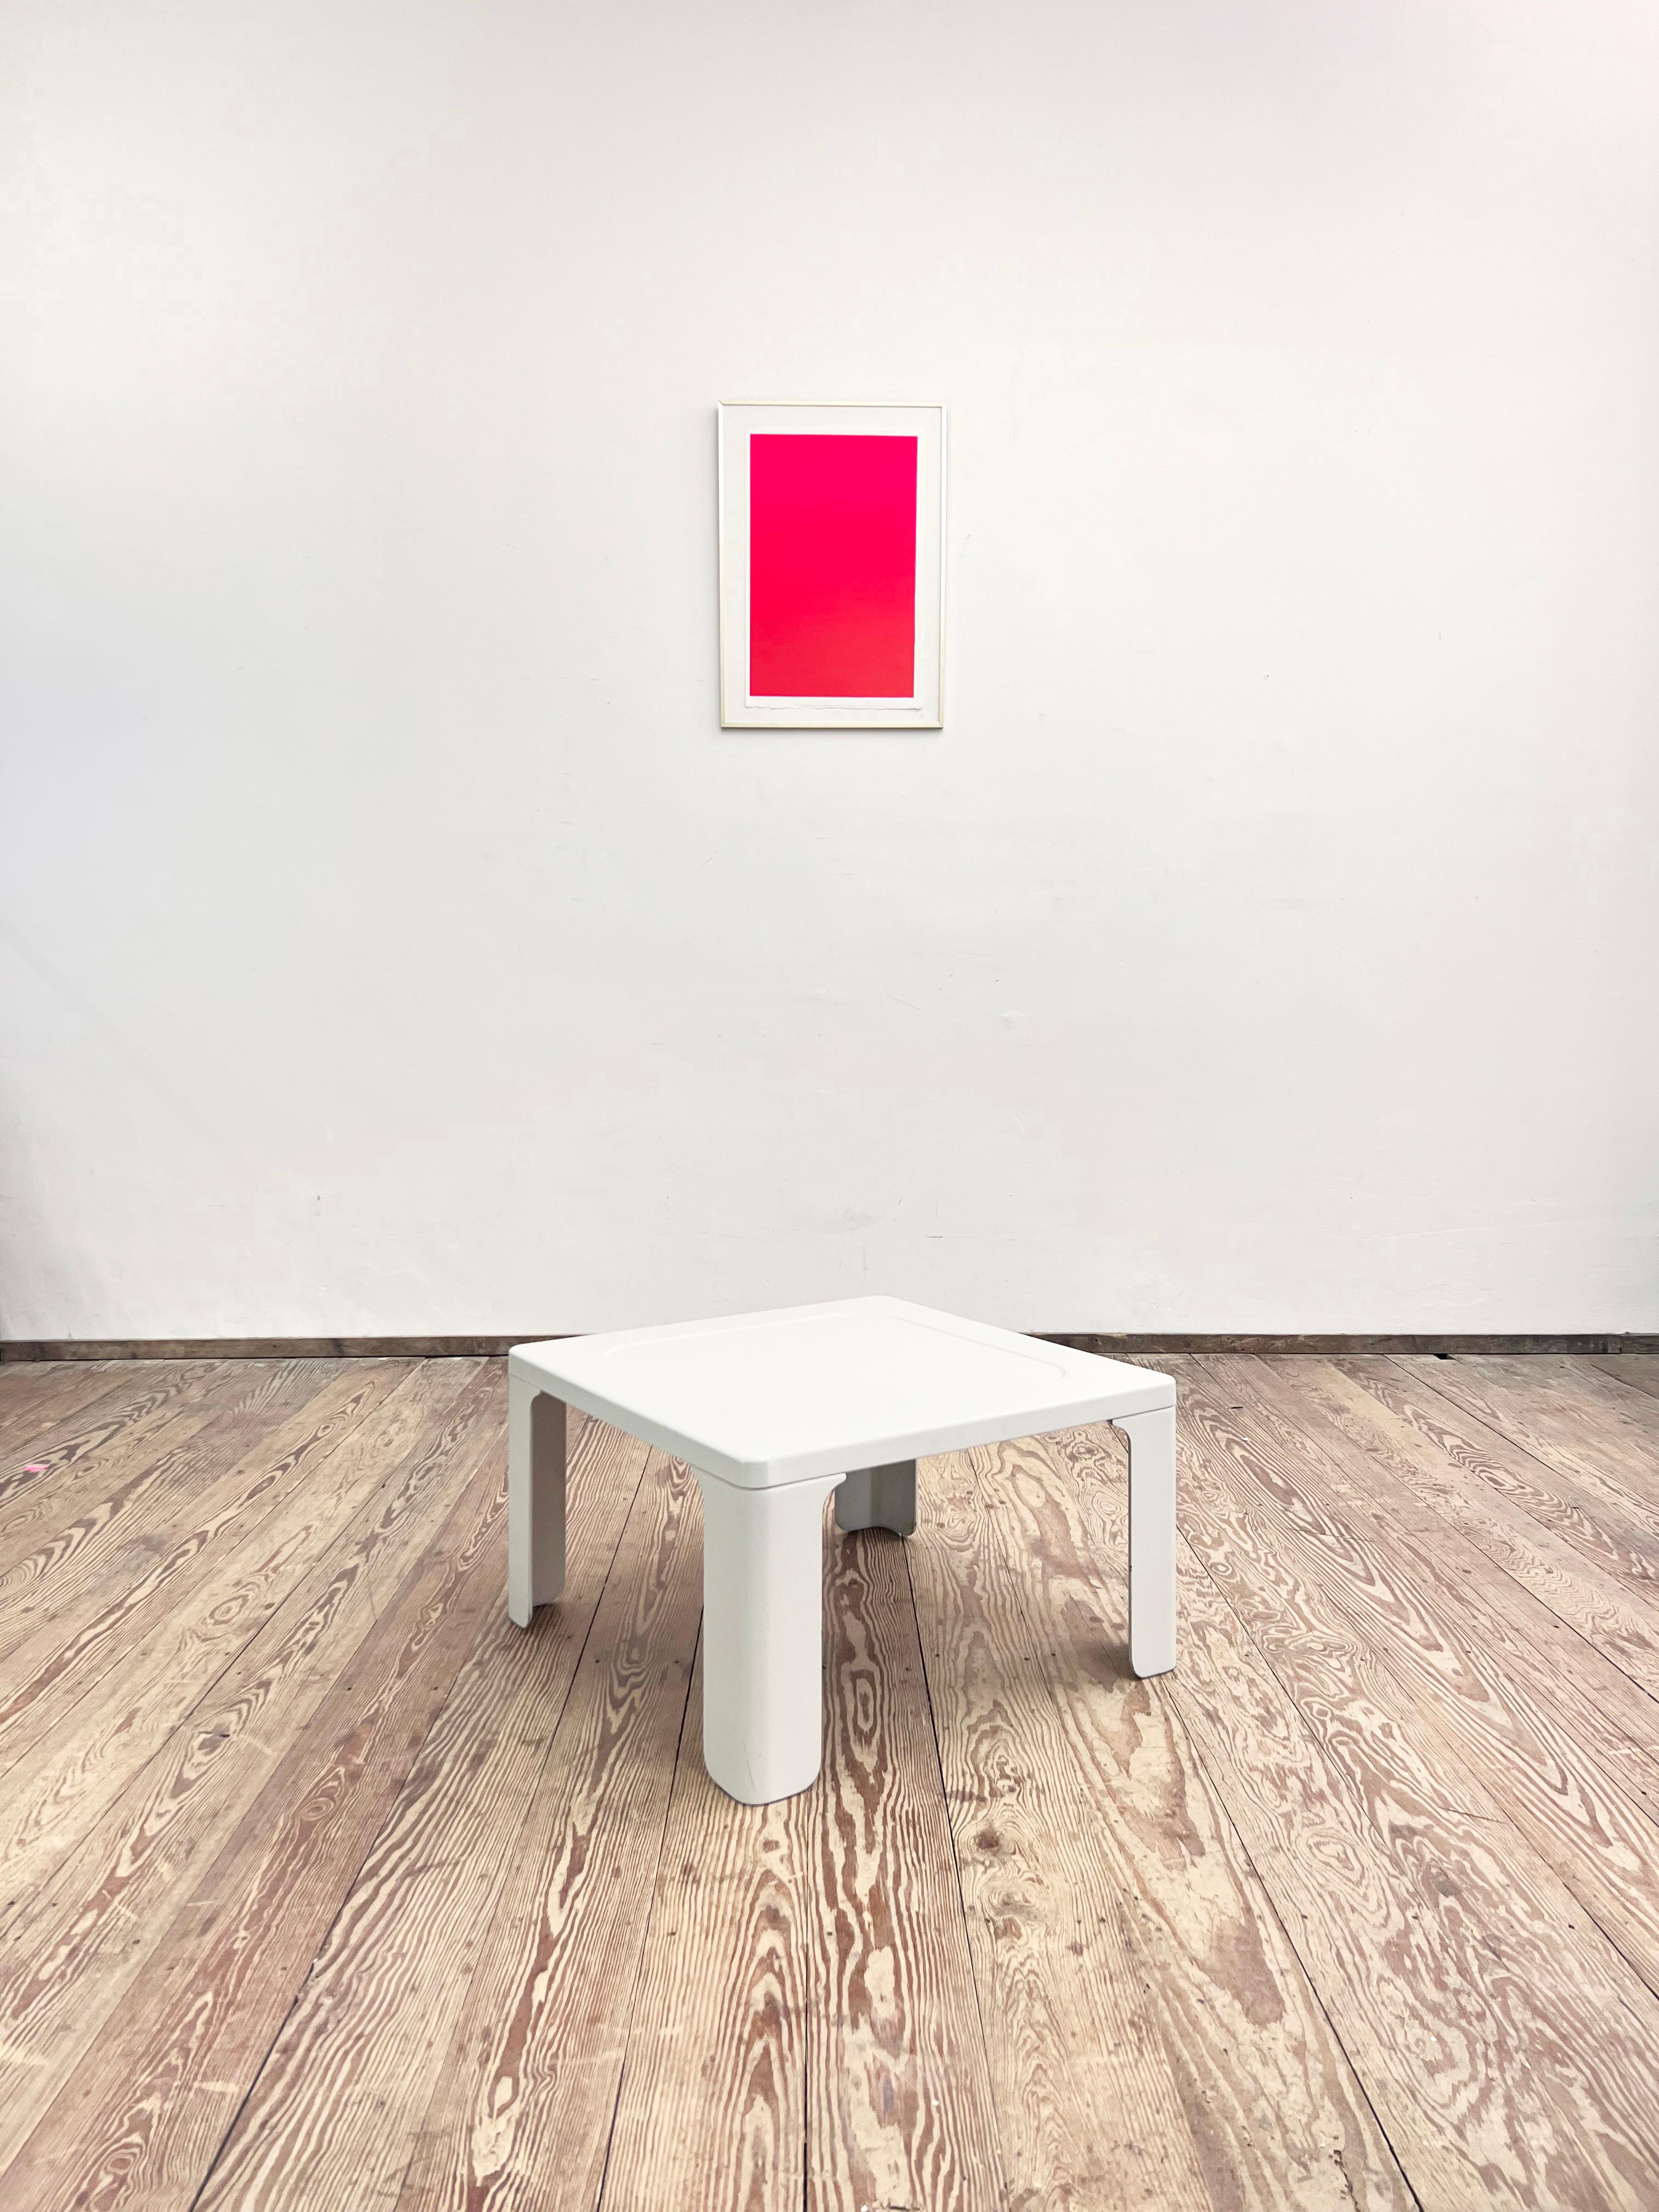 Dimensions ca. 65x 65 x 36 cm (WxDxHxSH)

This shapely coffee table was designed by German Designer Dieter Rams for Vitsoe in the 1960s in Germany. The table is part of the 620 series. The table is made out of palstic with a white coat. The legs can